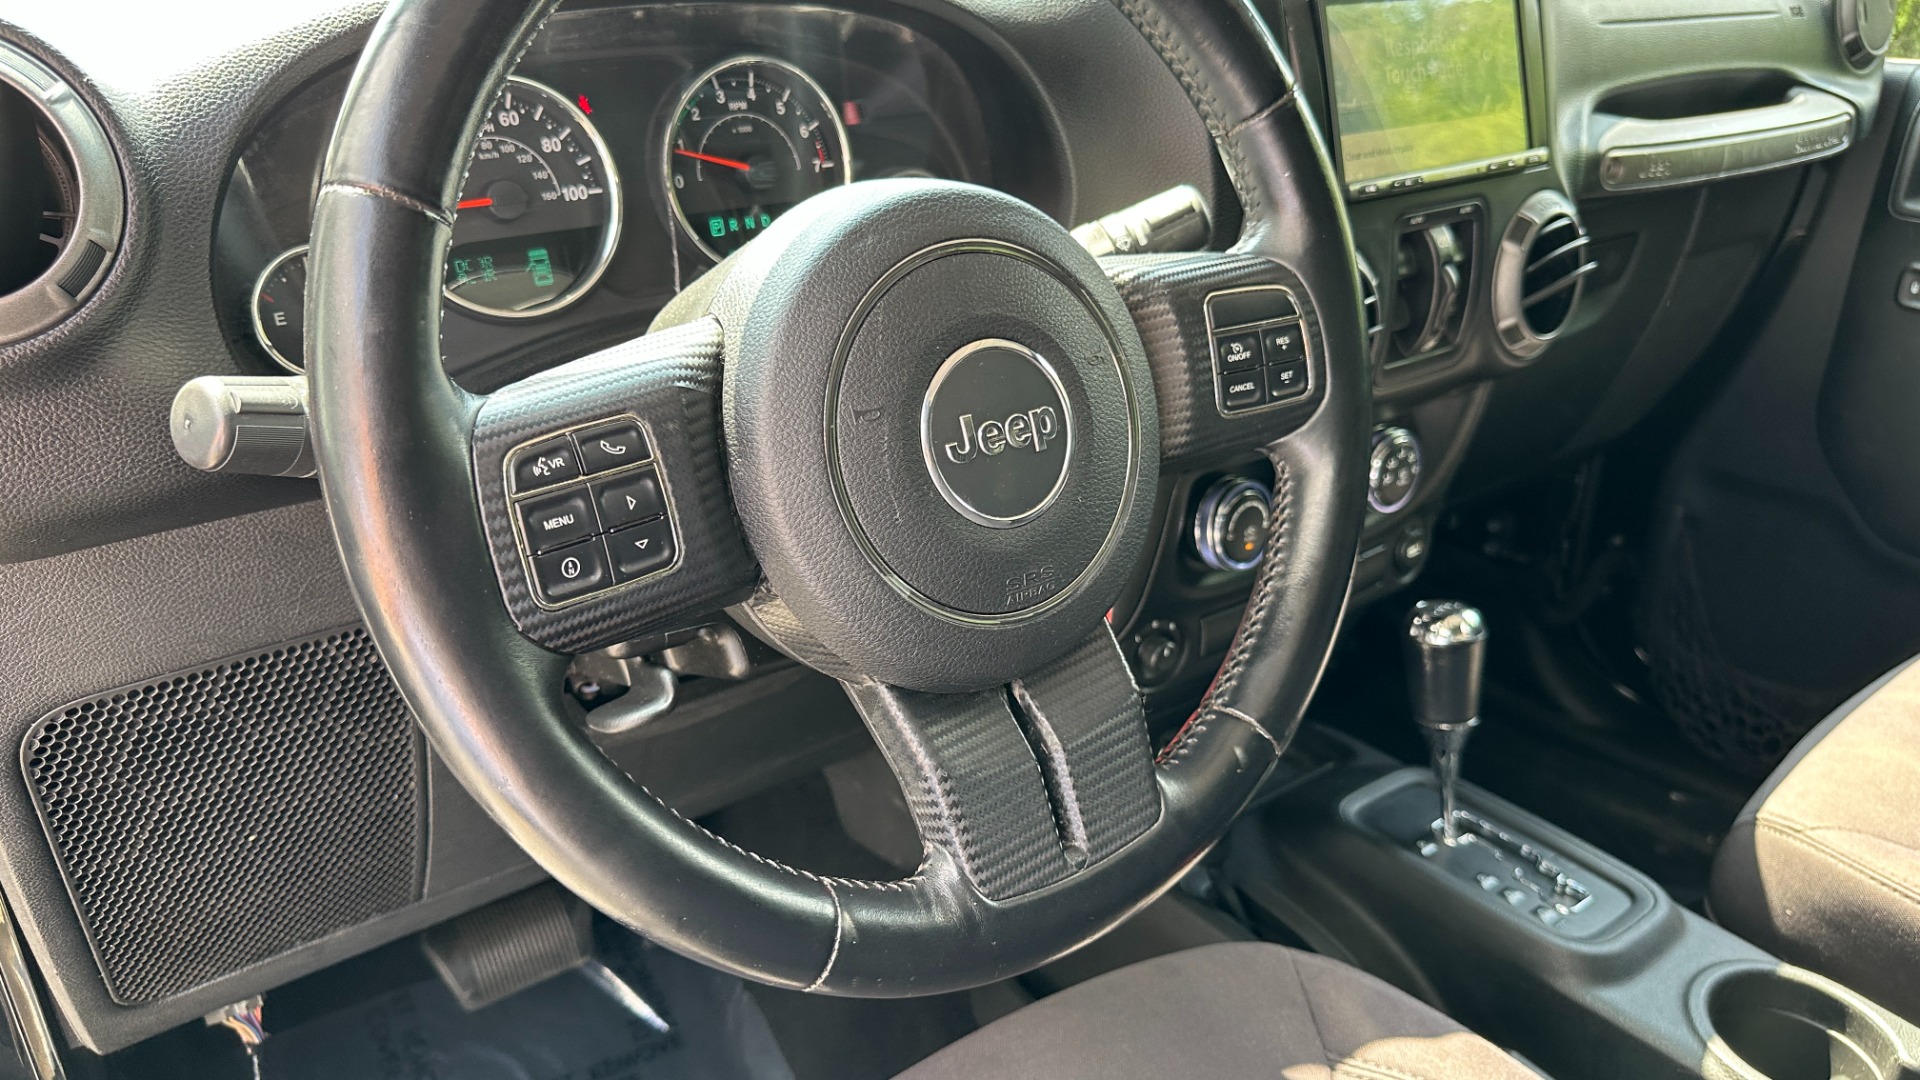 Used 2013 Jeep Wrangler Unlimited Sport / FOX SHOCKS / SOUND SYSTEM / TOUCHSCREEN / SUBWOOFER / TERRAFLEX SUS for sale $24,999 at Formula Imports in Charlotte NC 28227 16